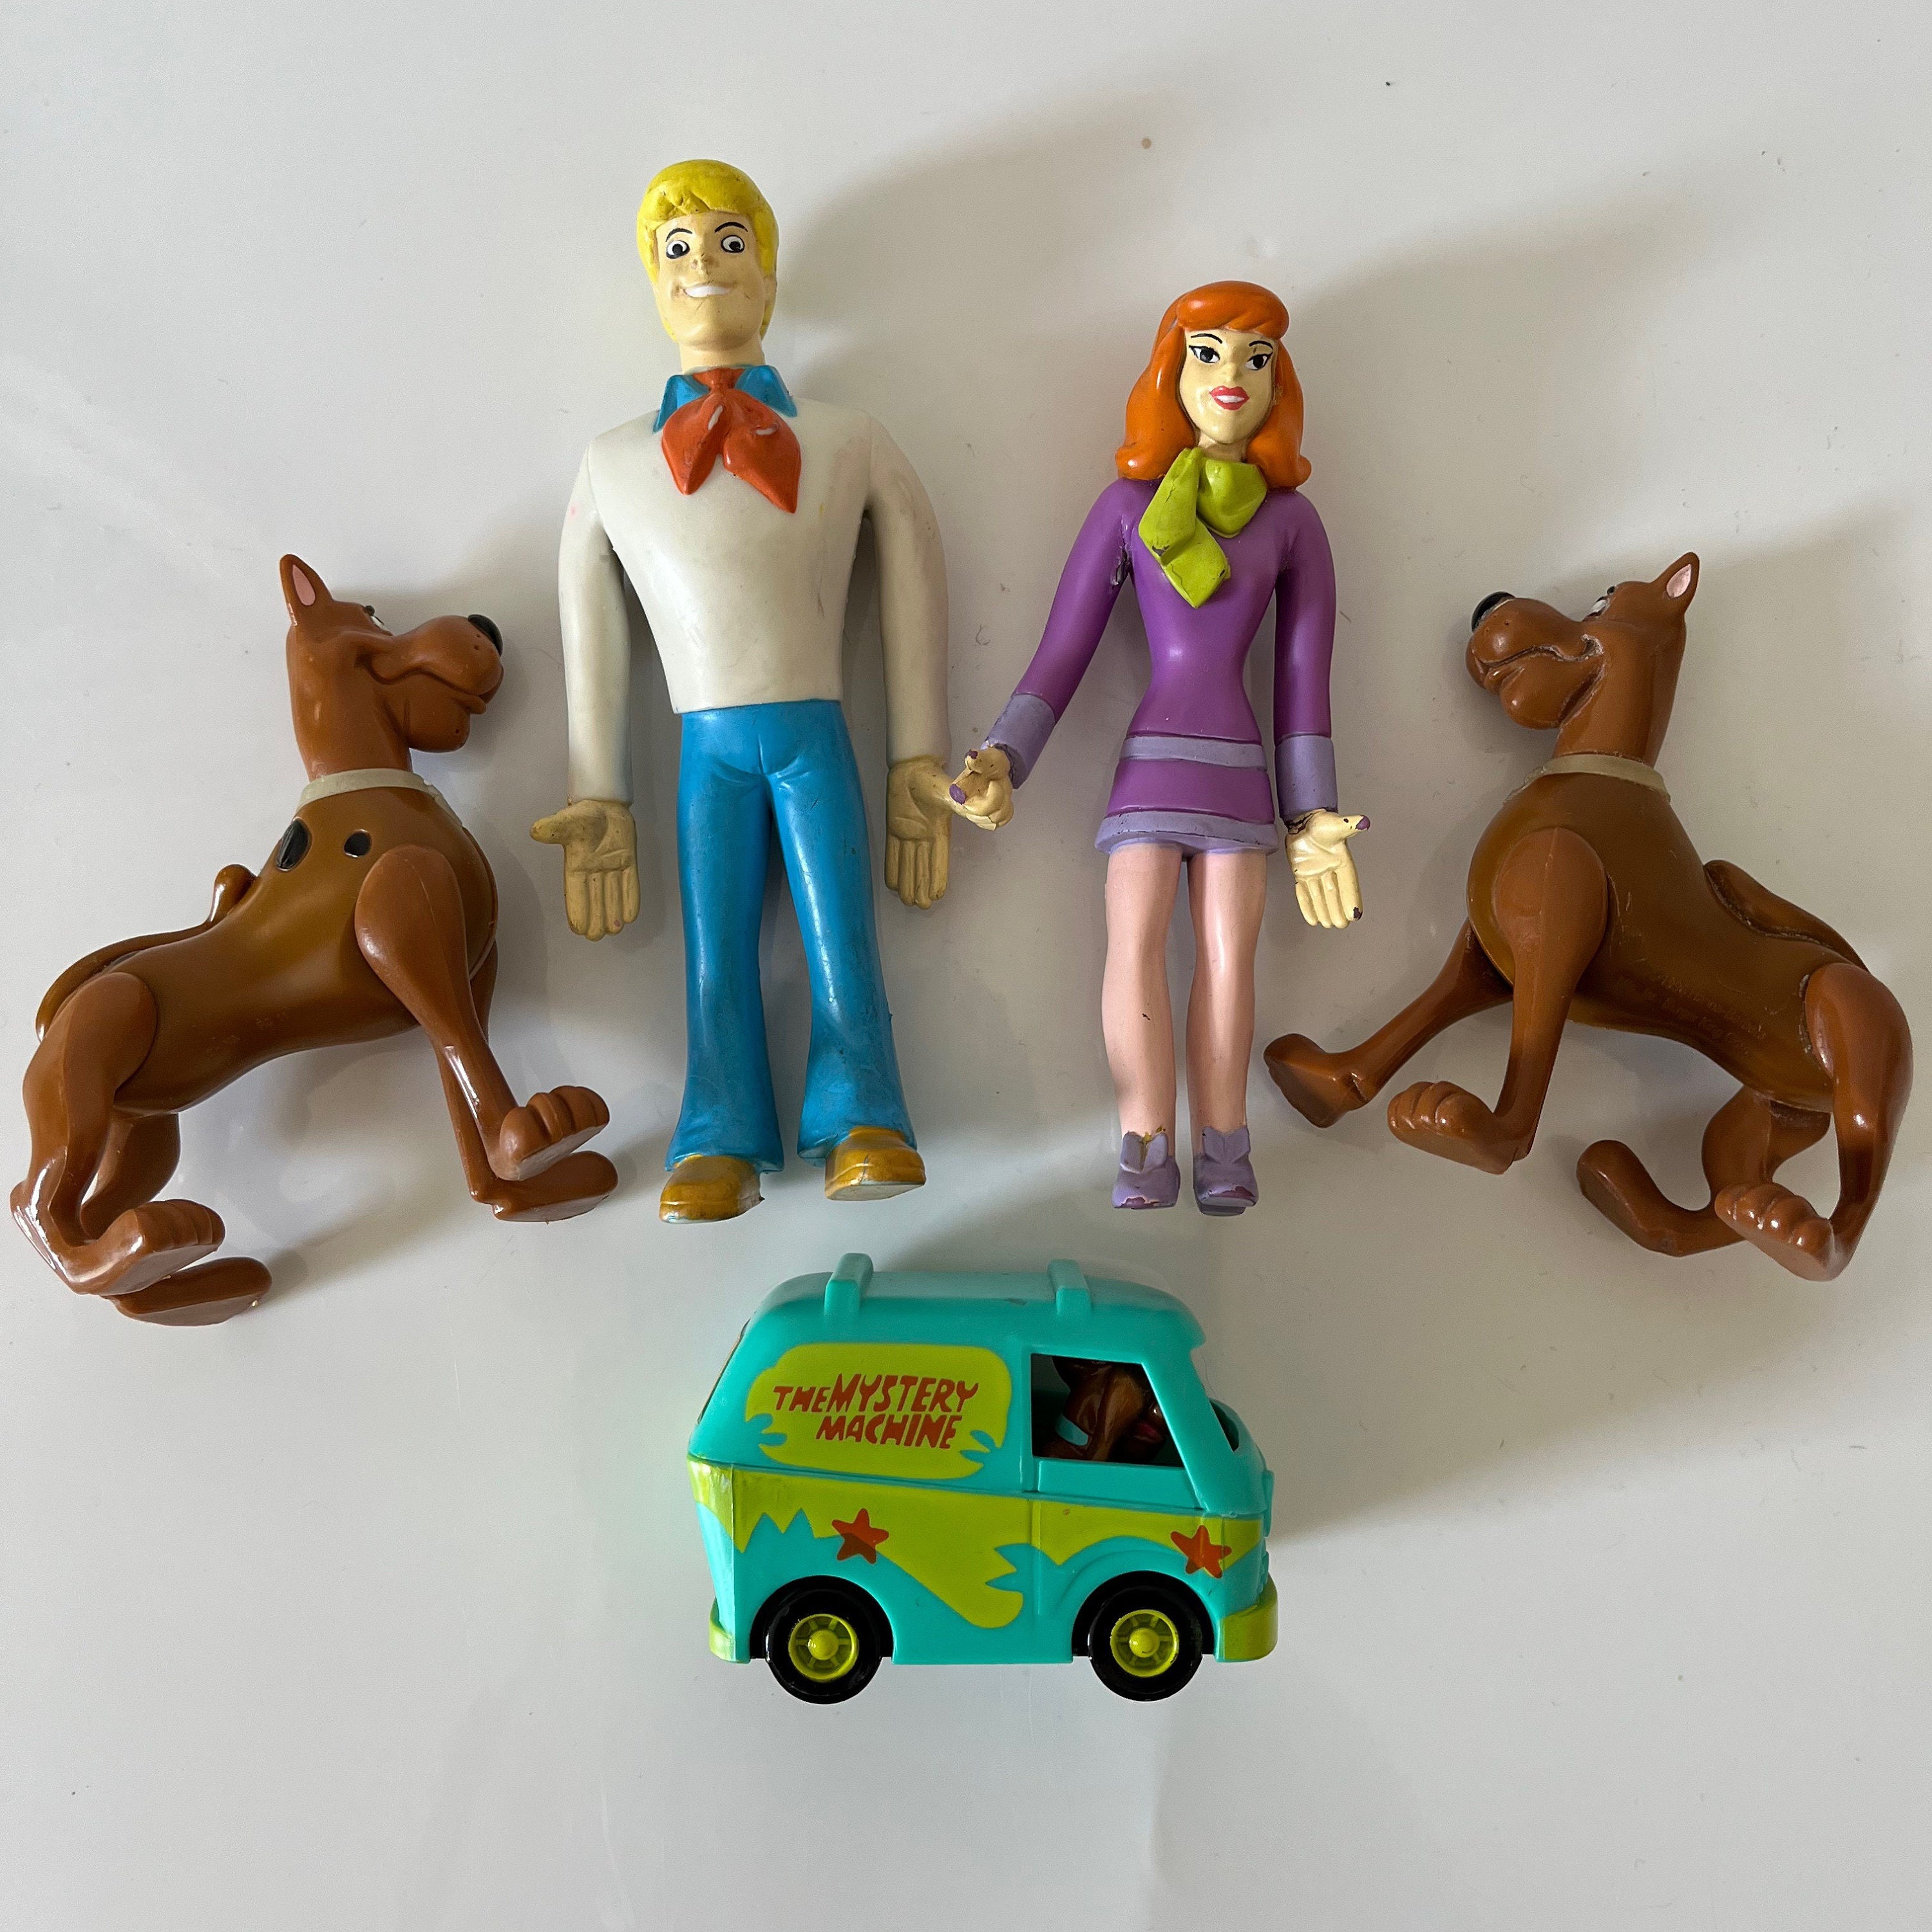 Vintage Scooby Doo Figurines - Etsy Hong Kong